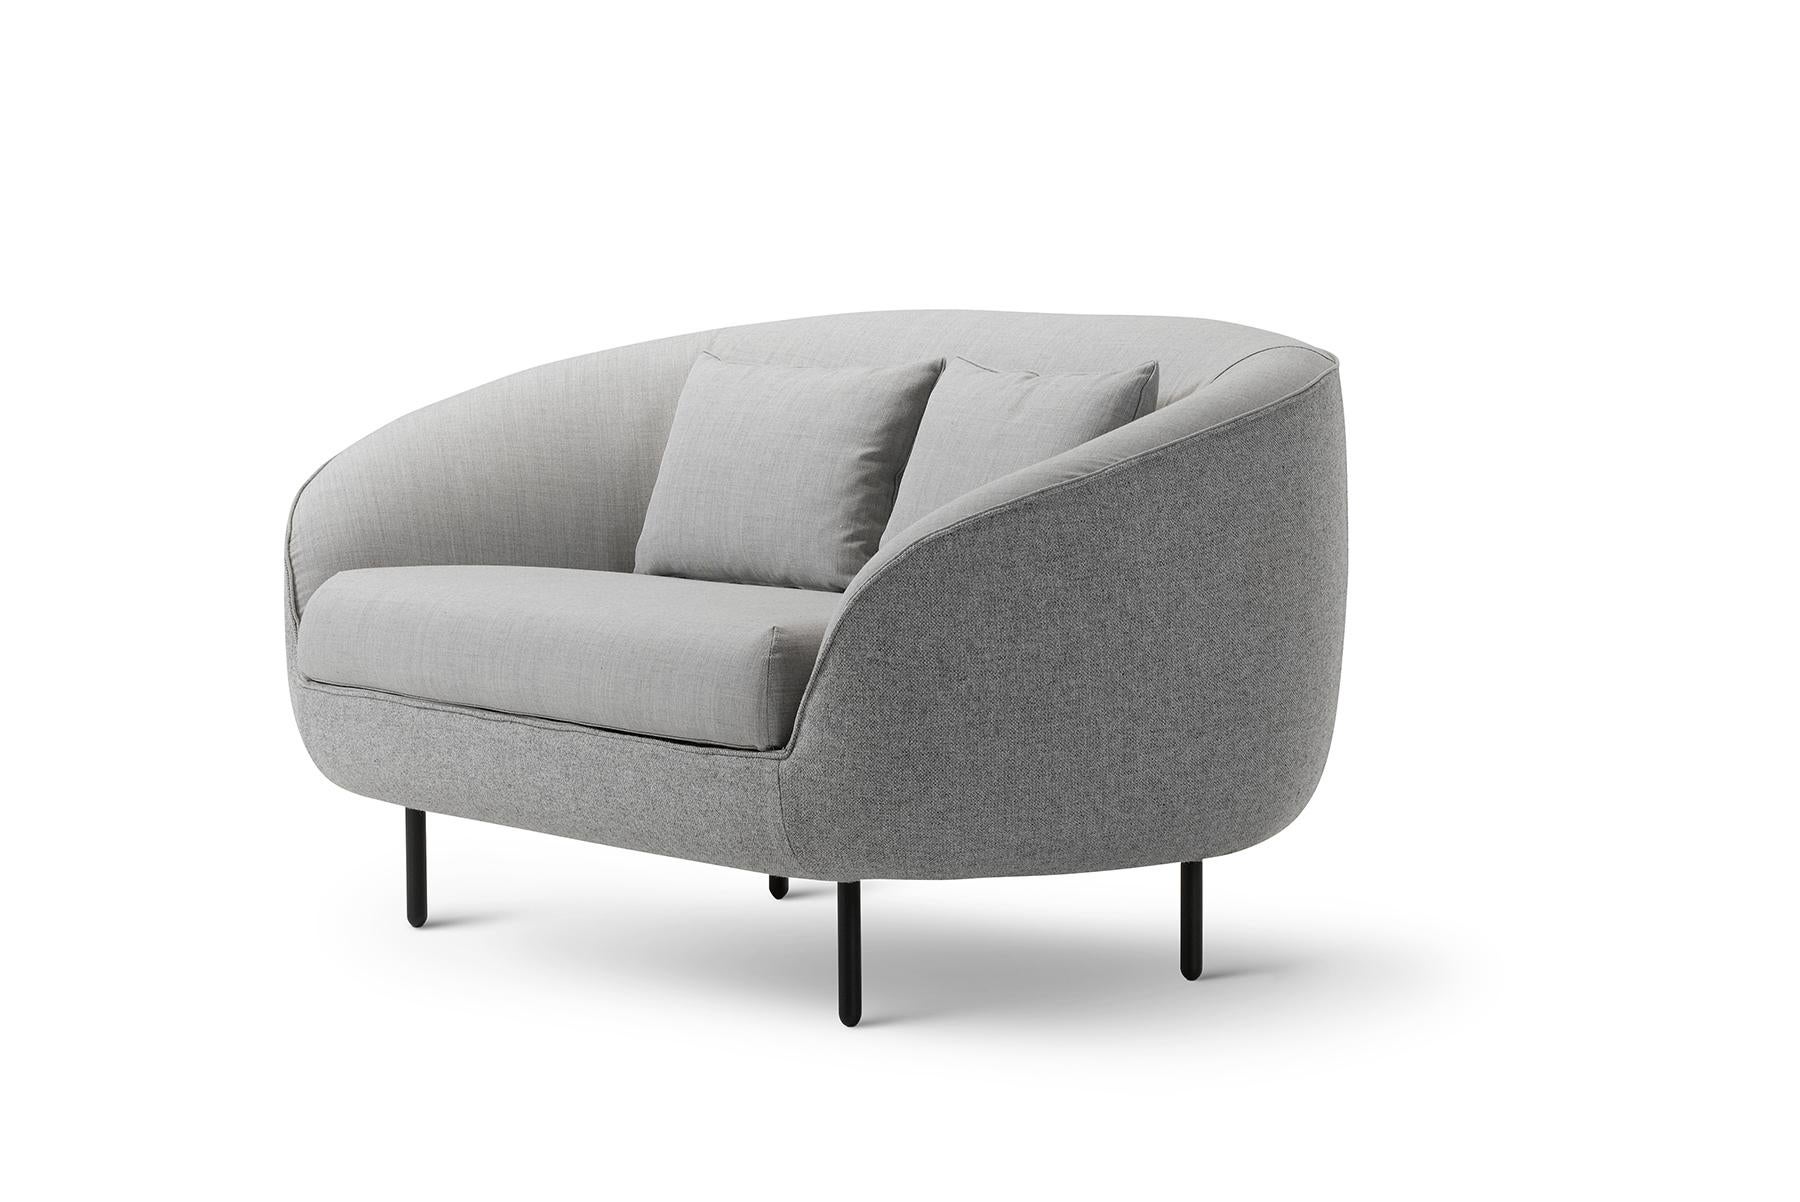 Gamfratesi The Haiku Low 2-Seater sofa offers both a protective shell and cosy inner setting. Perfectly suited for larger spaces where the setting calls for more intimate privacy seating.